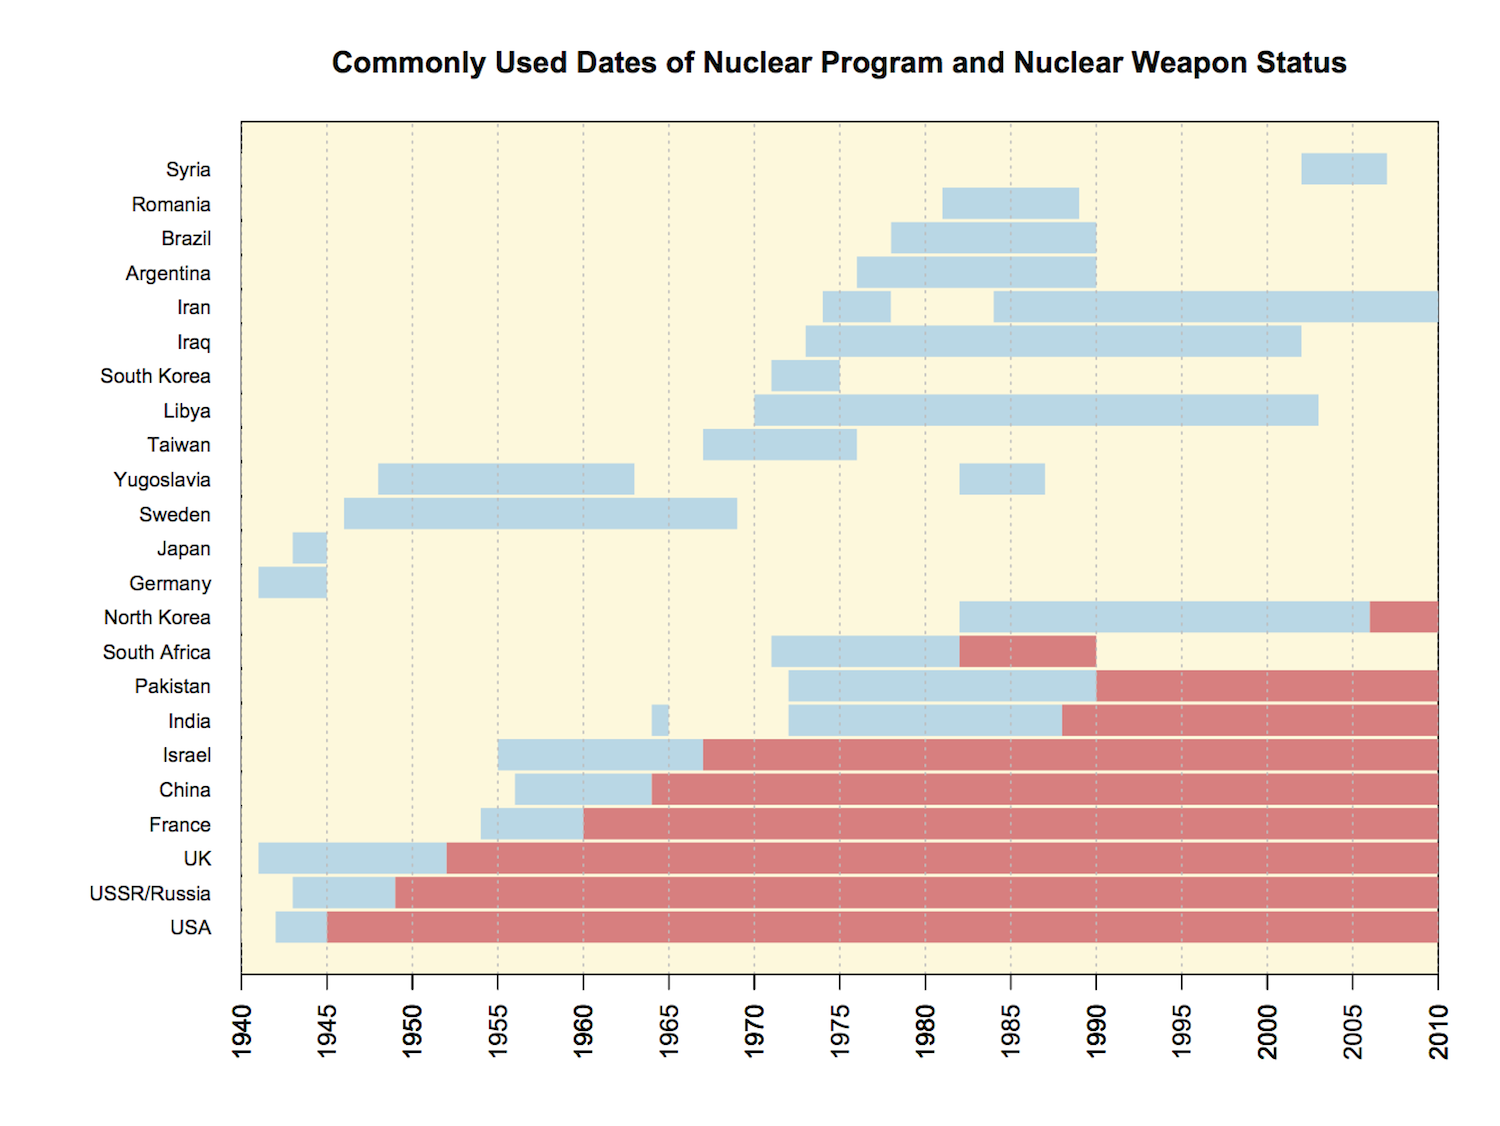 "Assessing Nuclear Proliferation Risk"